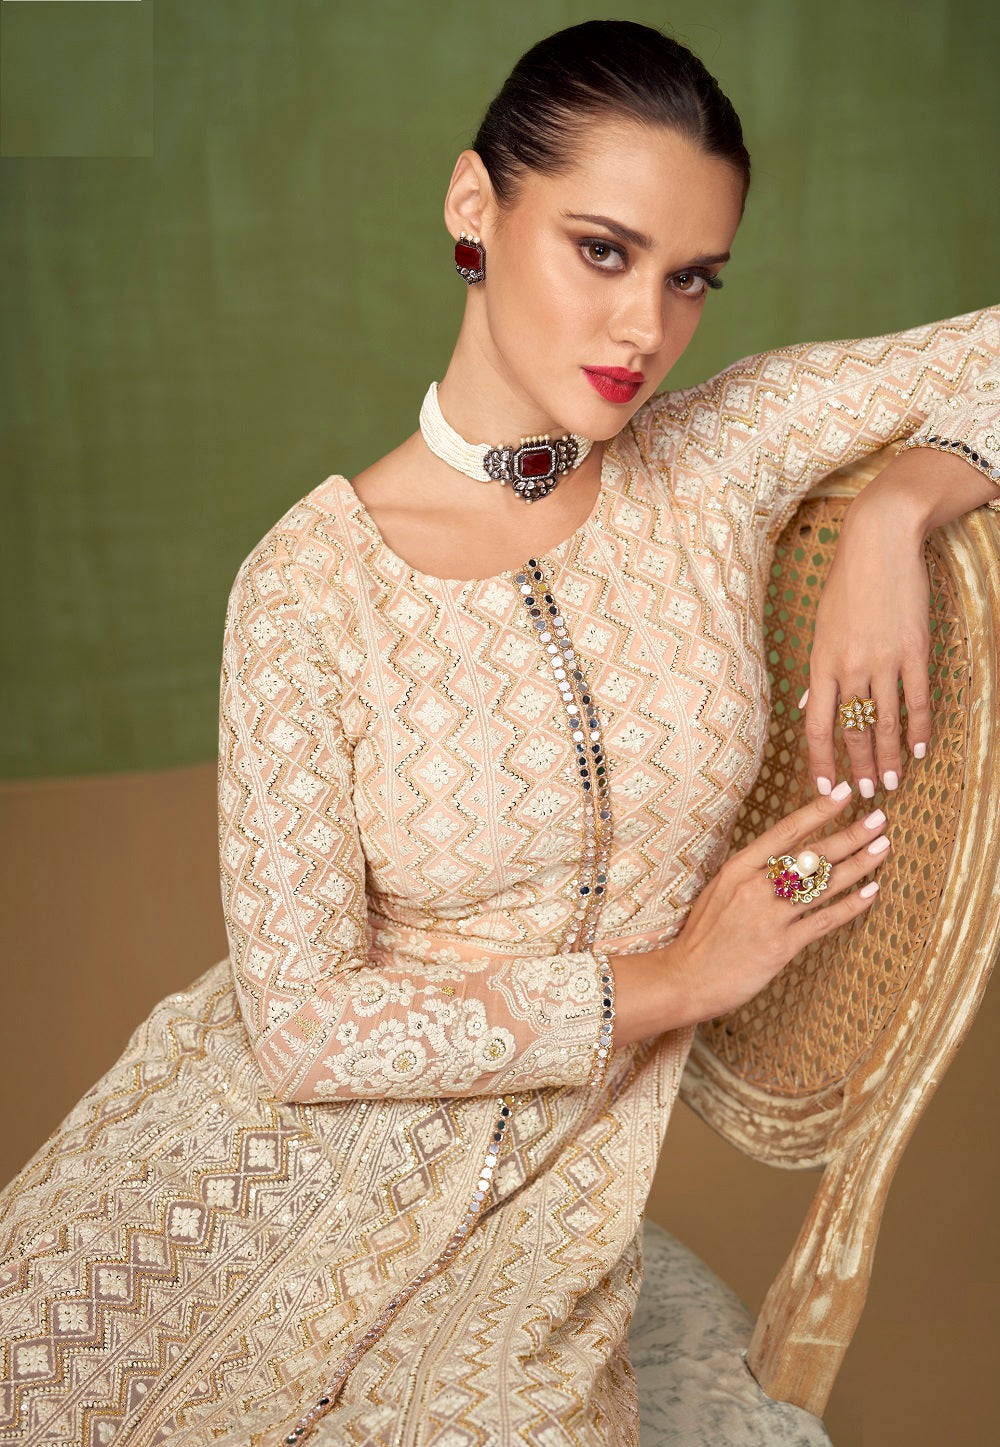 Georgette Embroidered Front Slit Pakistani Suit in Peach